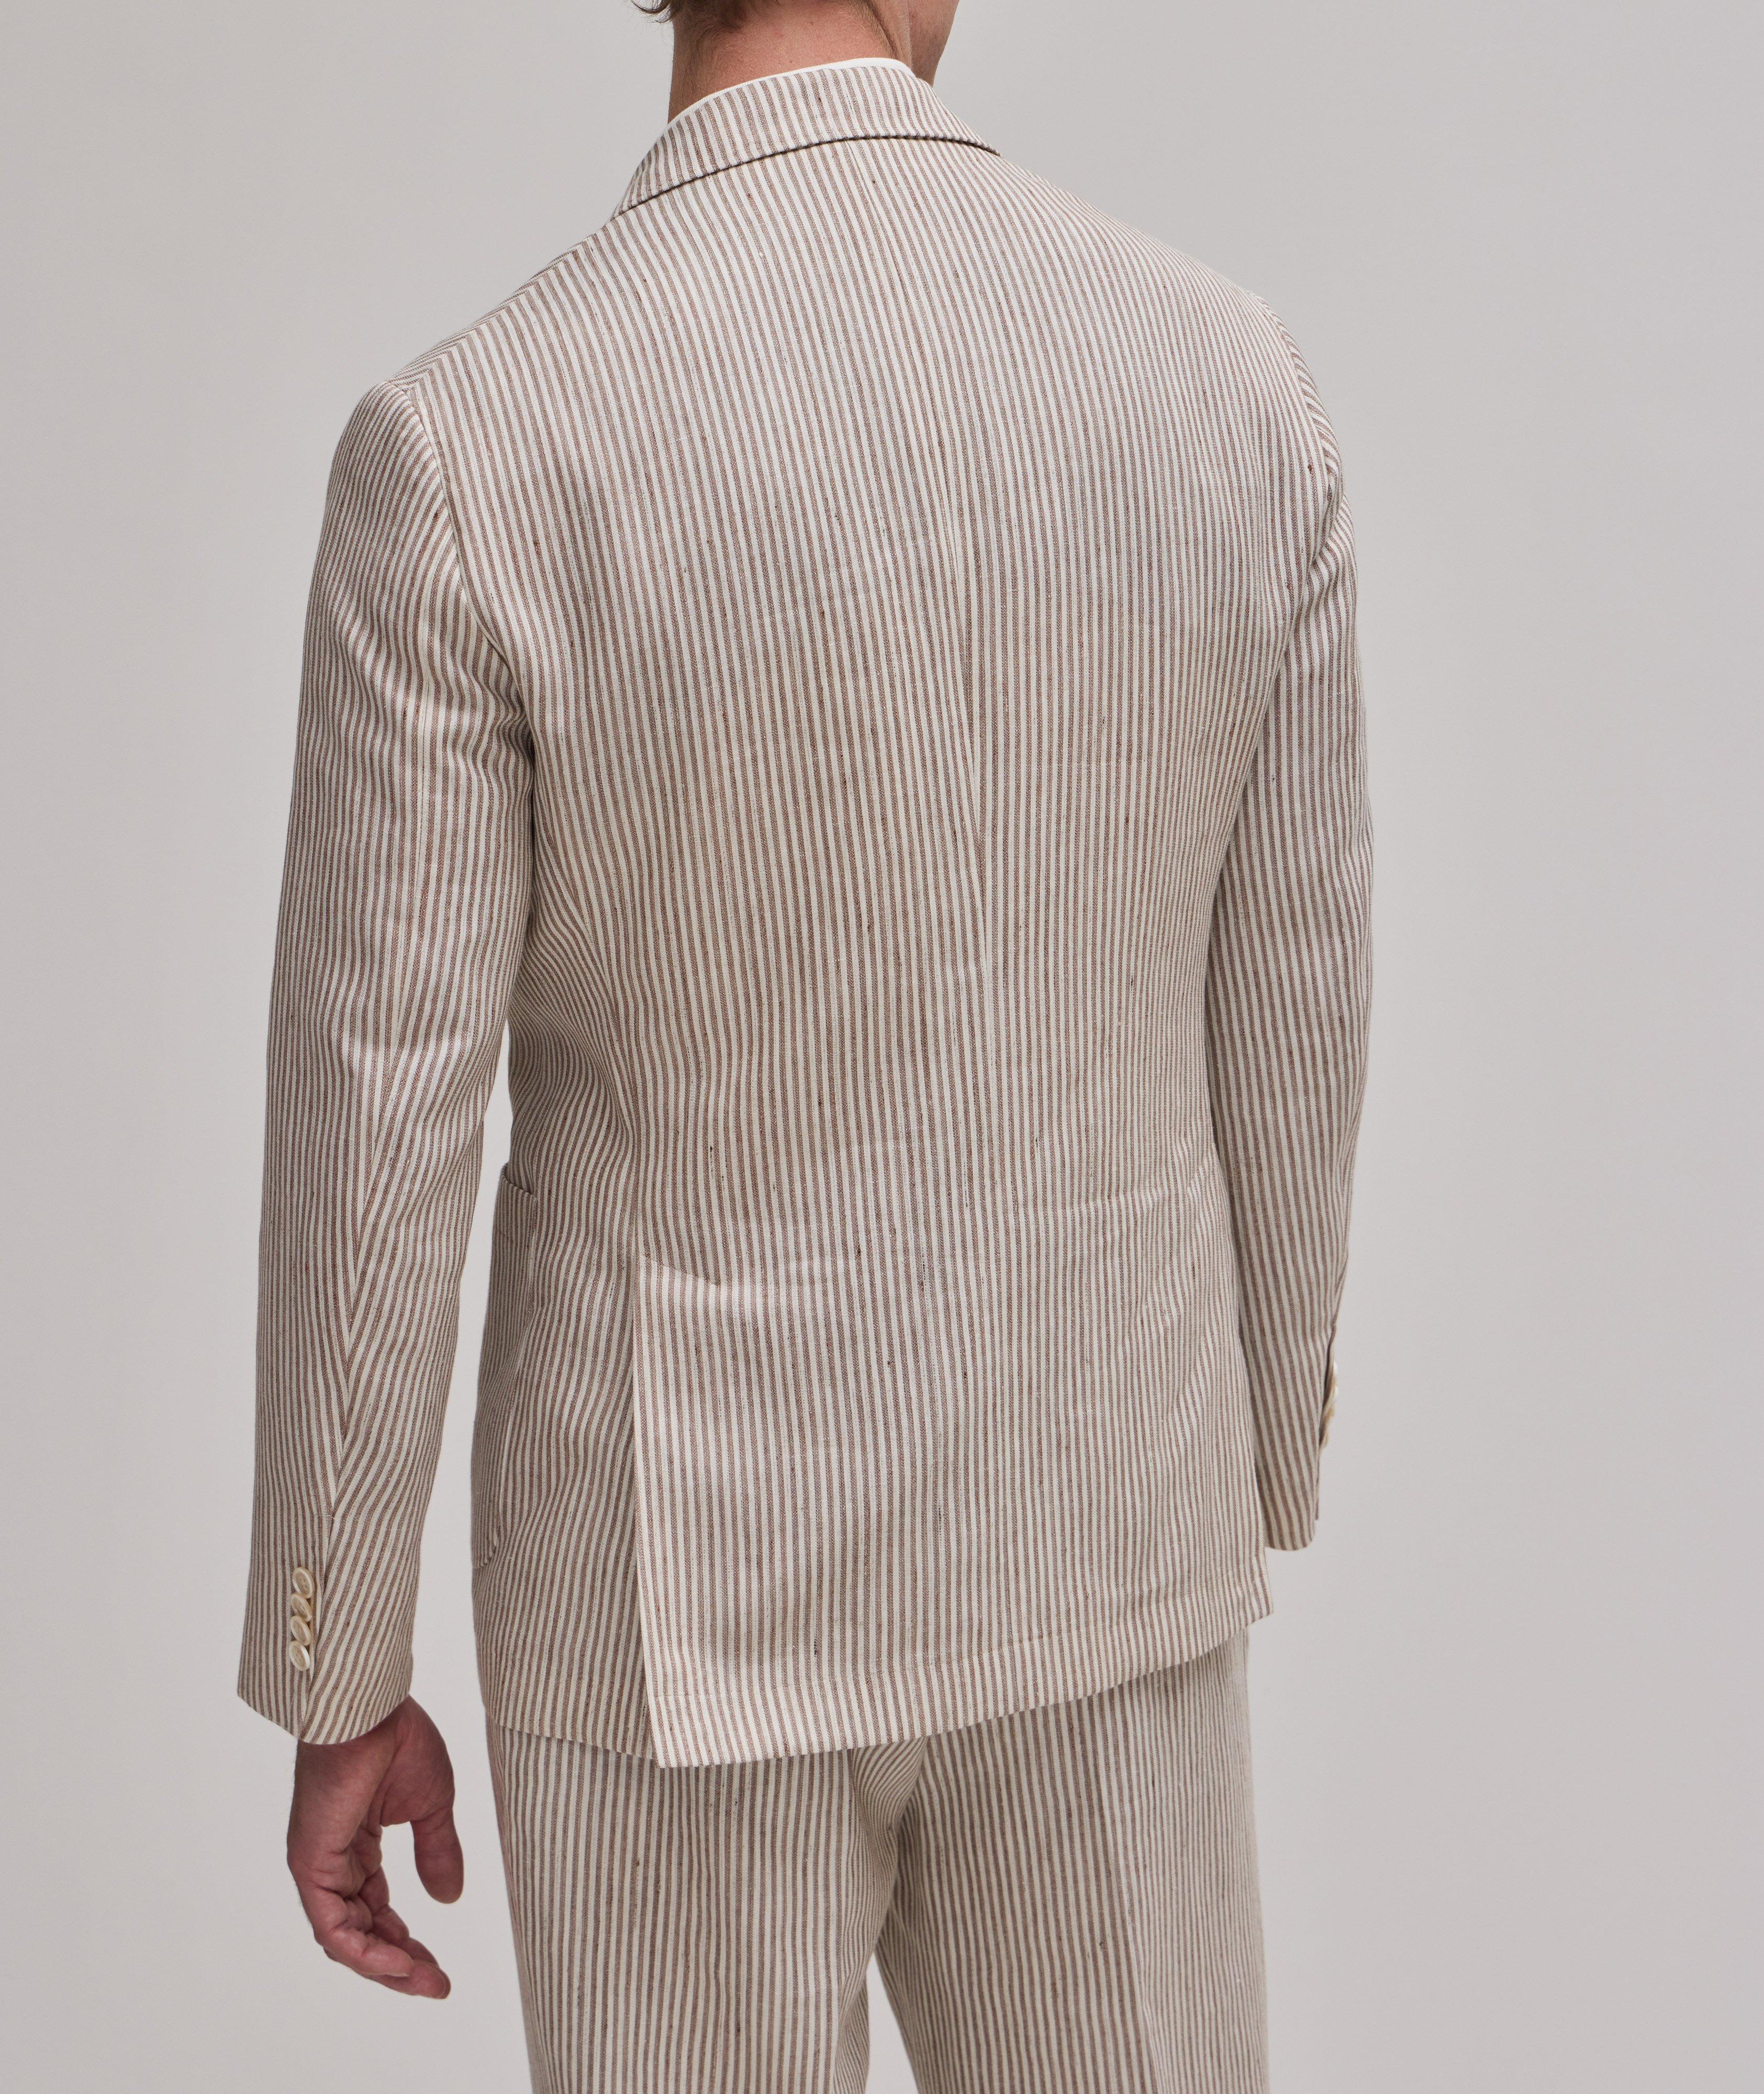 Striped Linen-Wool Unstructured Sport Jacket image 2